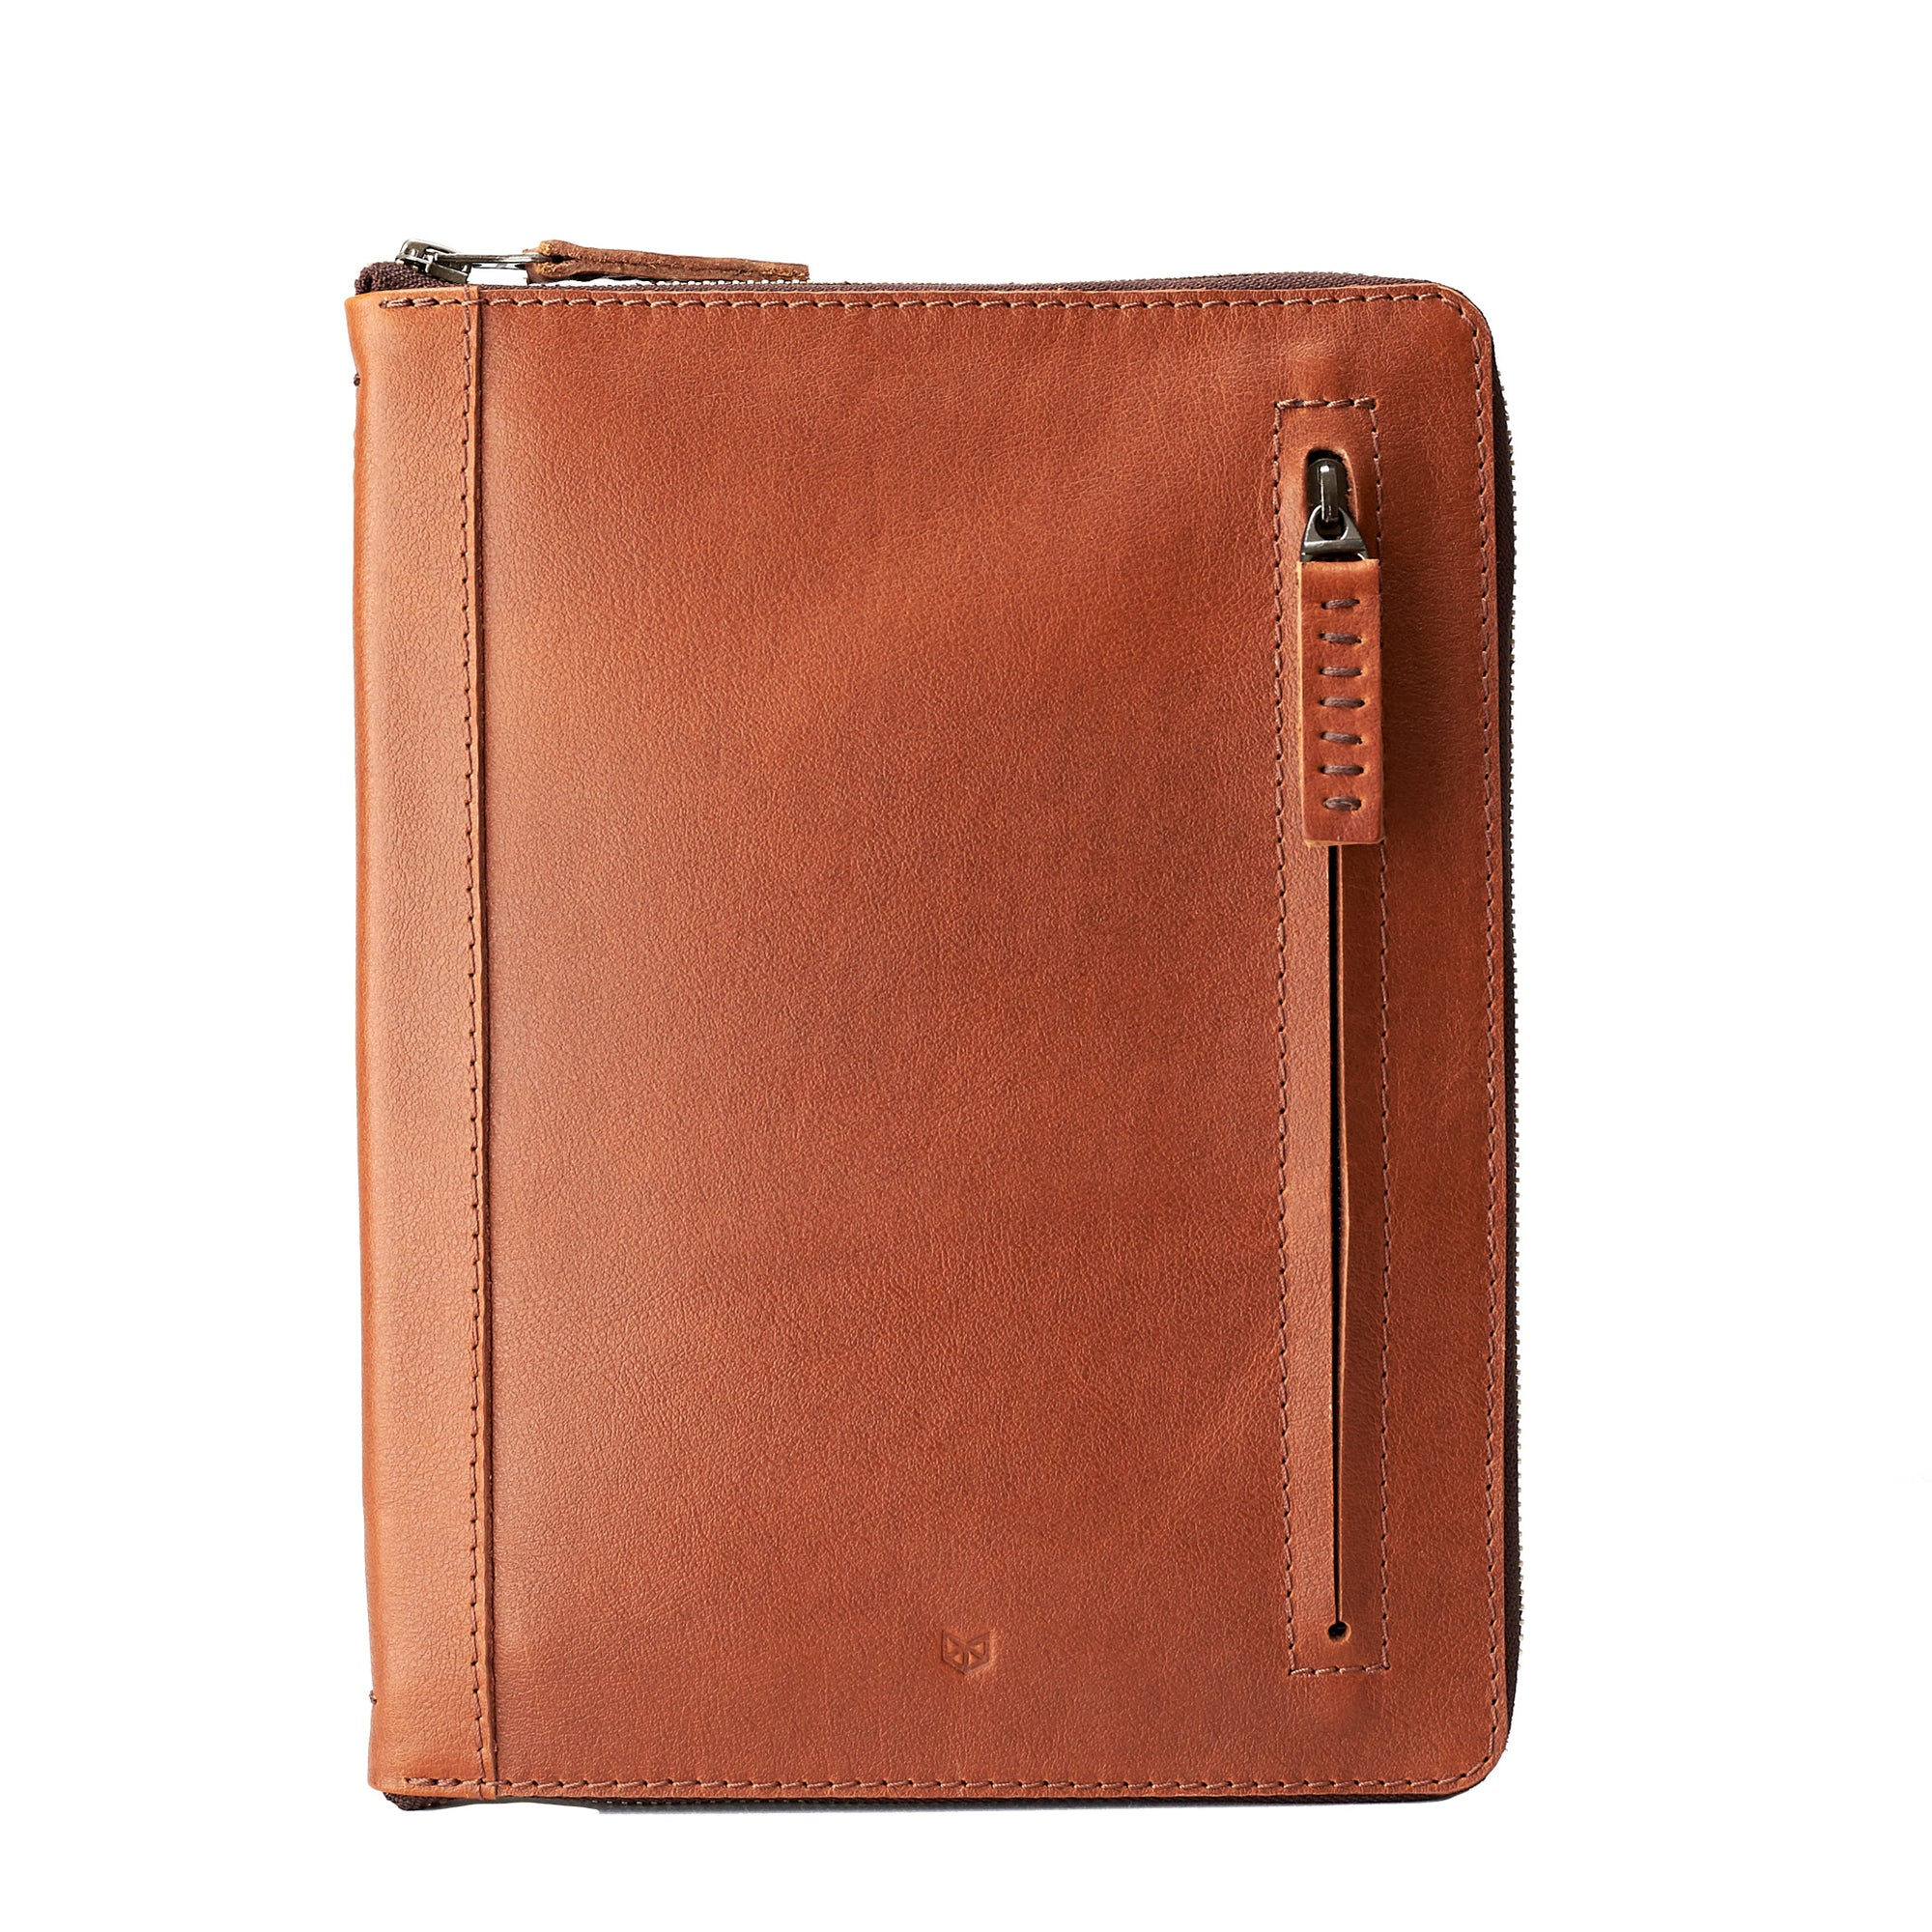 A5 leather notebook cover by Capra Leather. Gifts for artists.